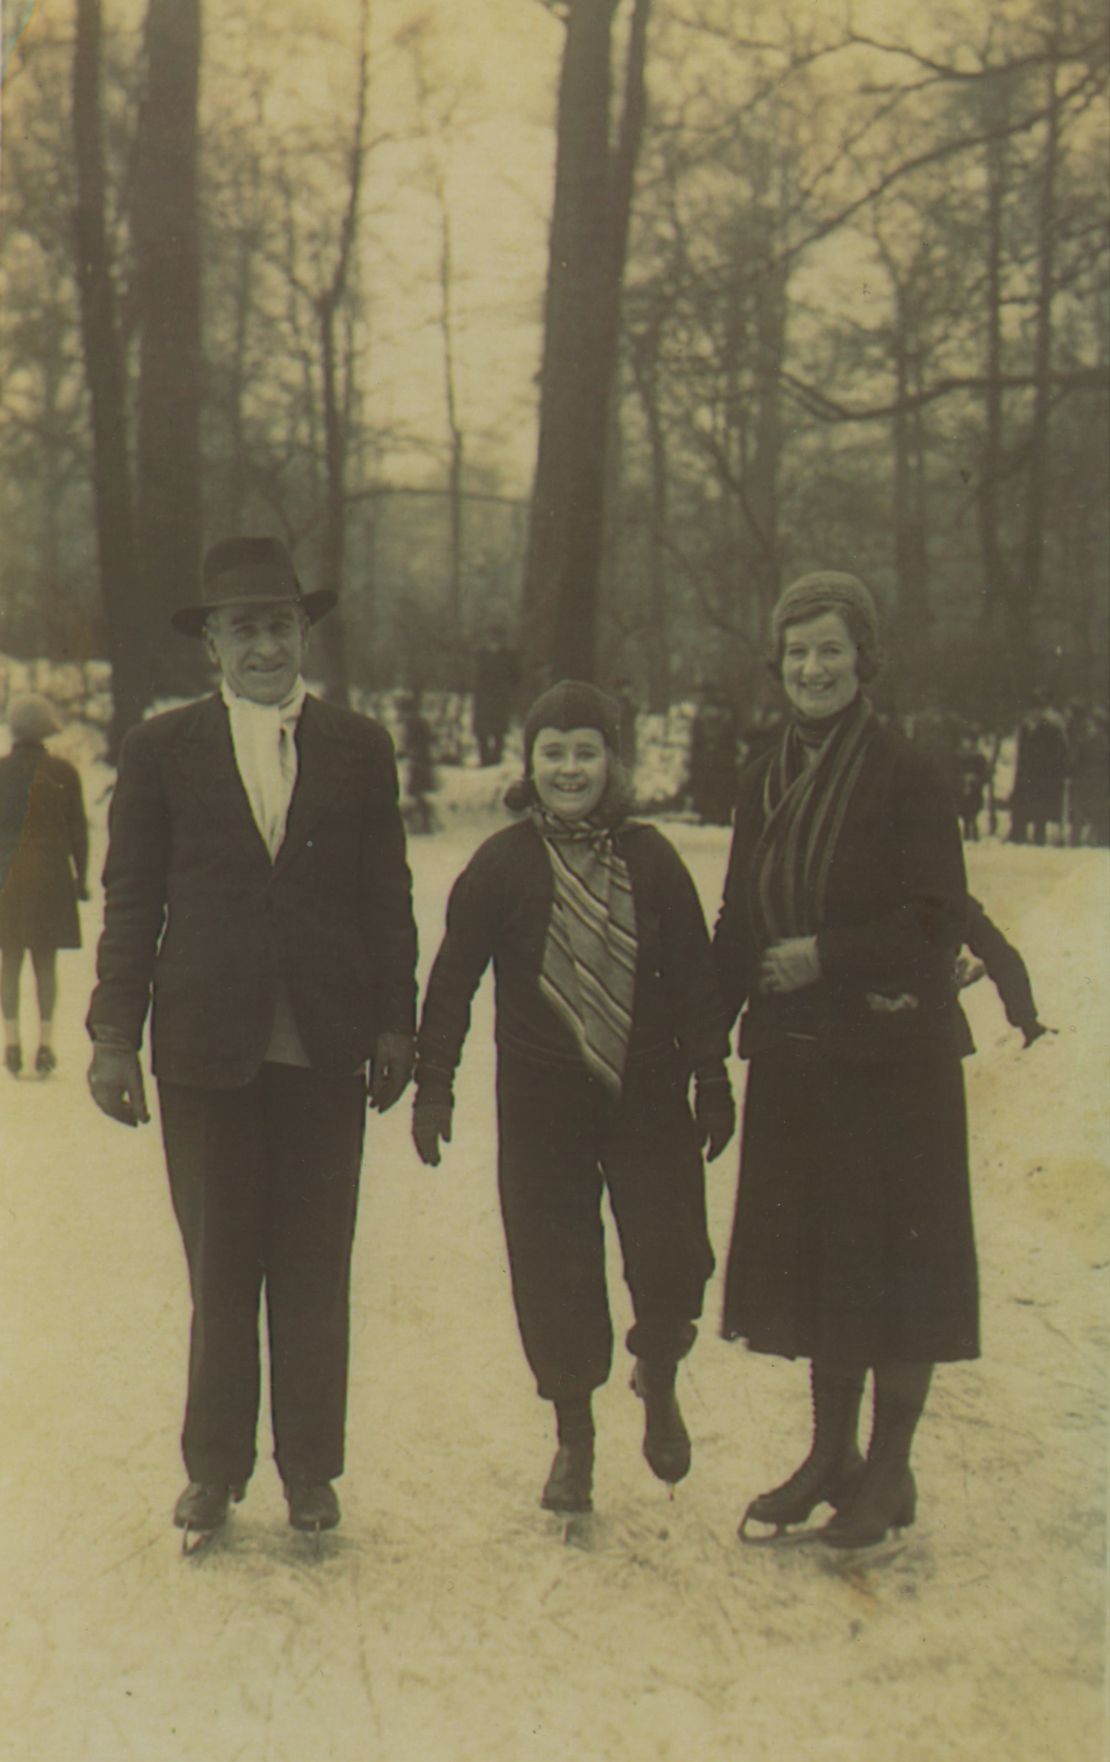 Frank Foley in Berlin with wife Kay and daughter Ursula in 1930s Germany.